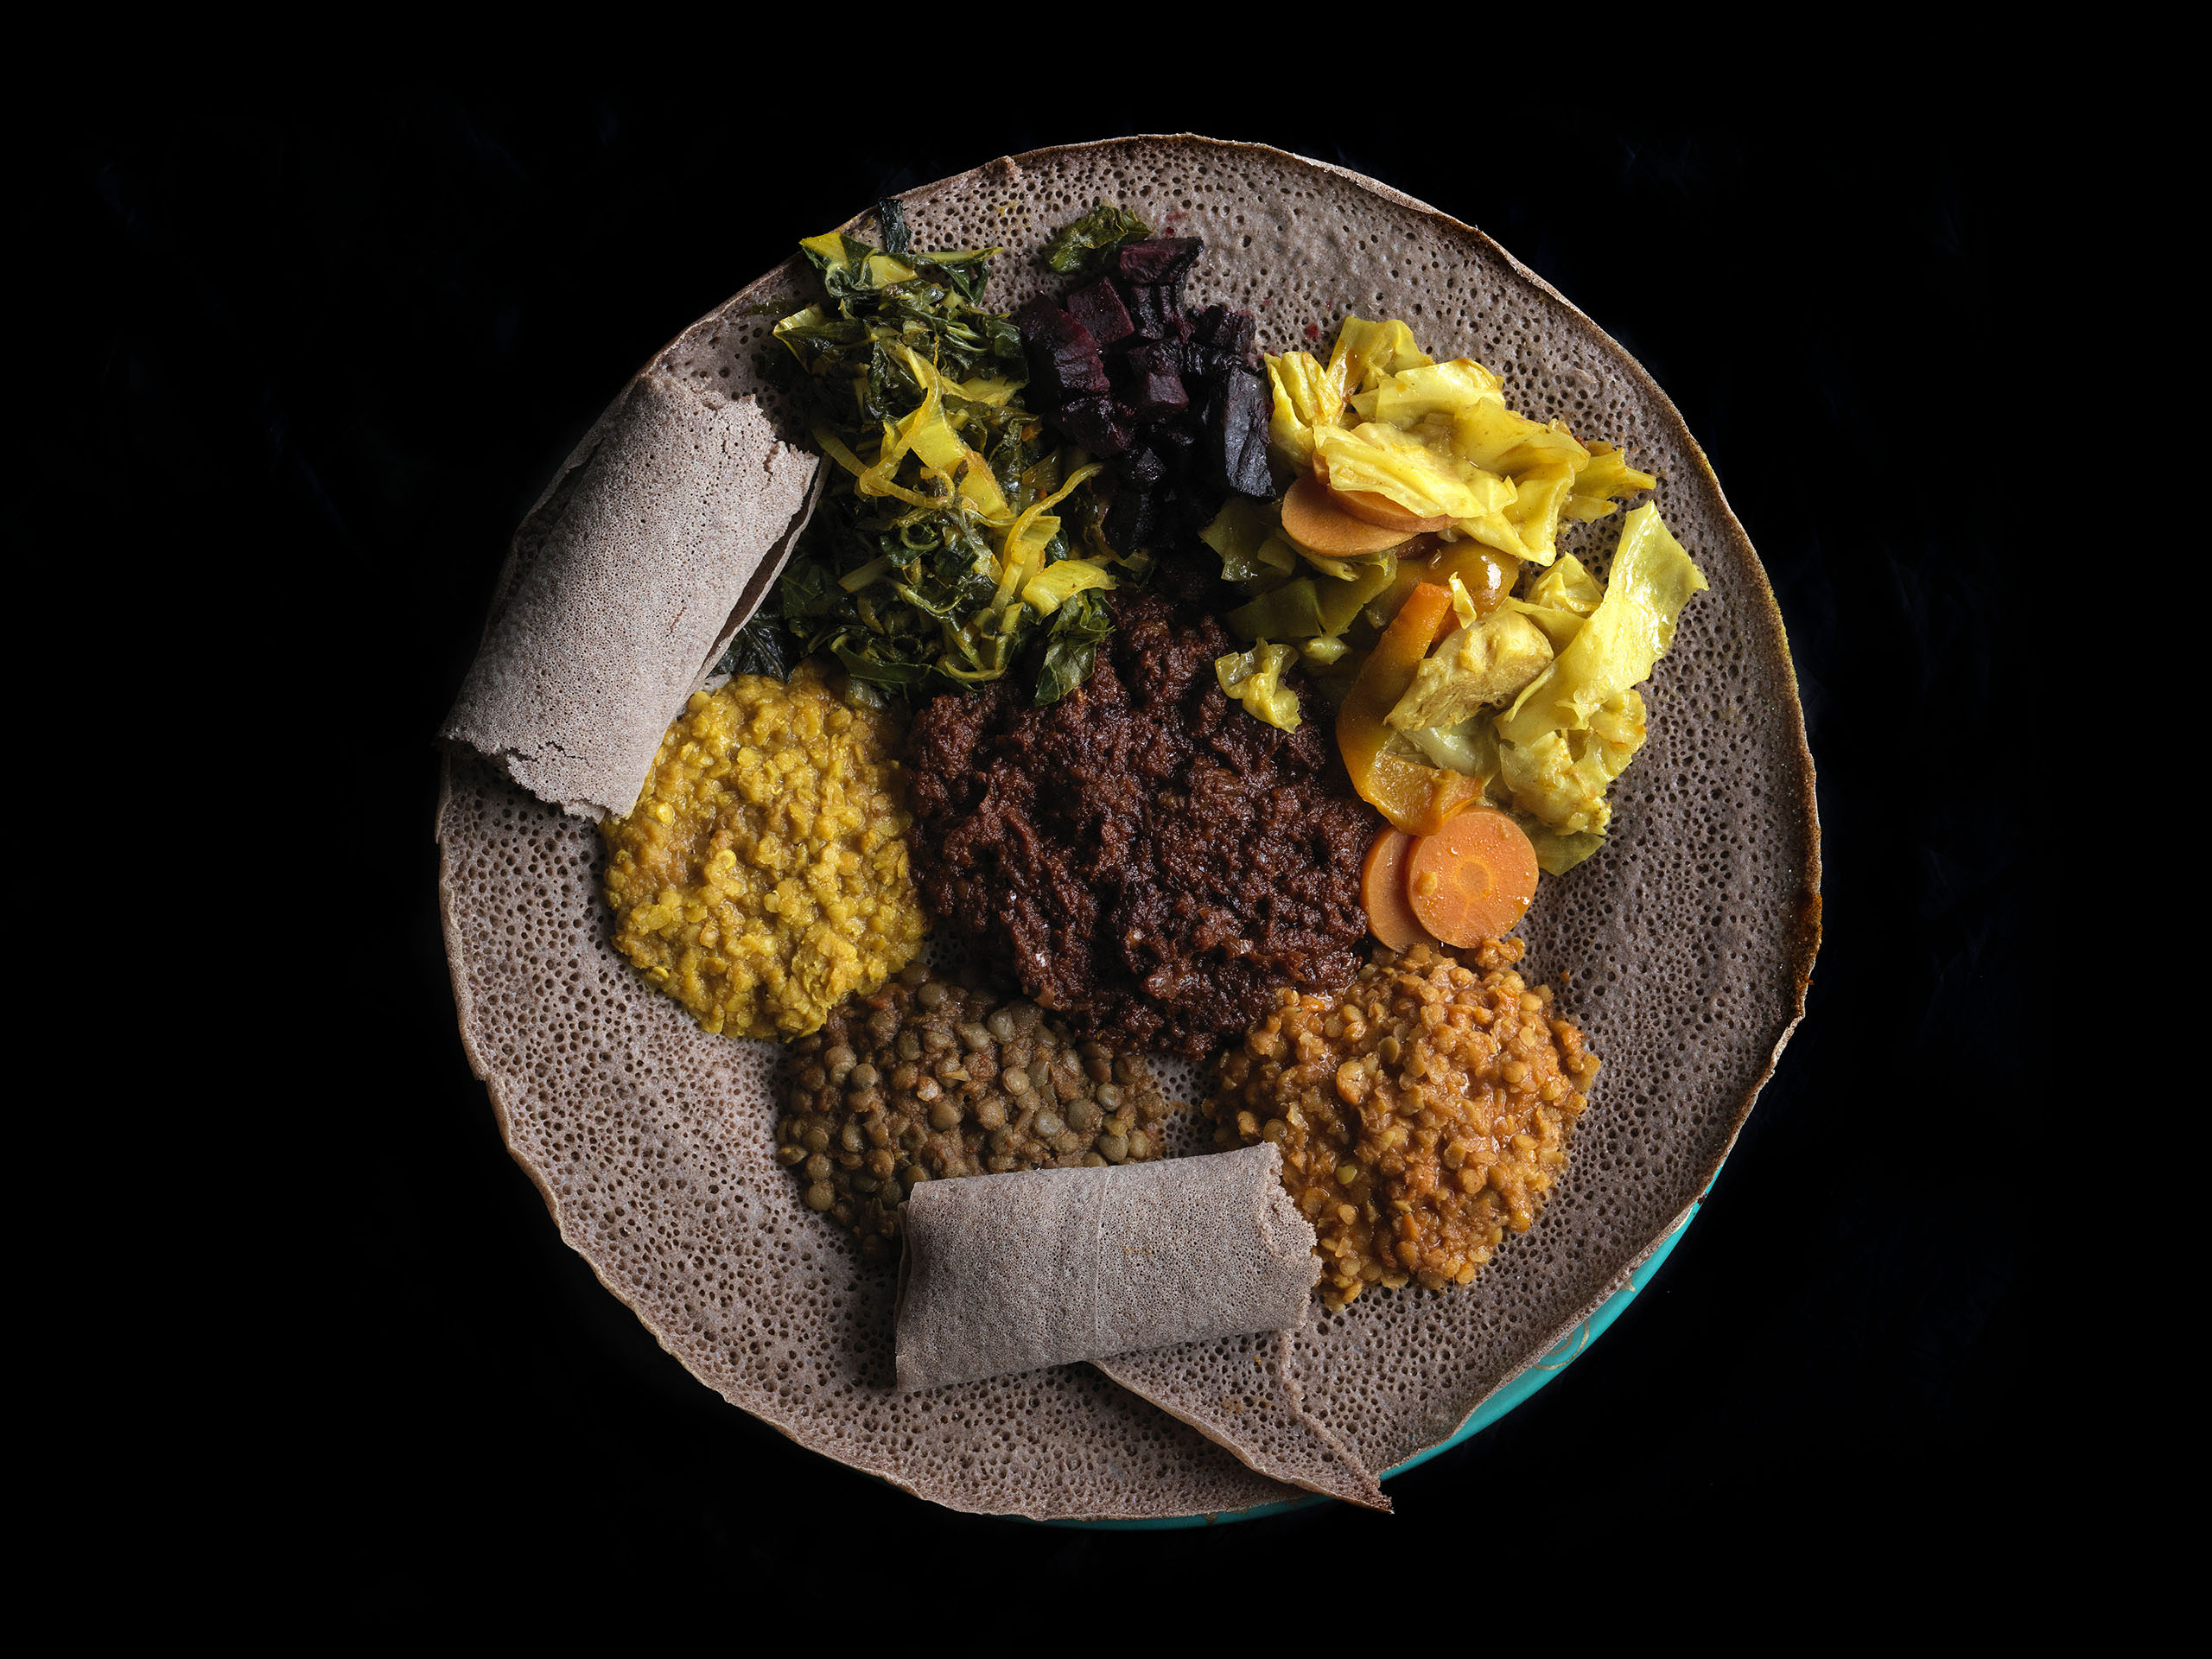 Ethiopian enjera - fermented crepe with pickles, ferments and lamb curry